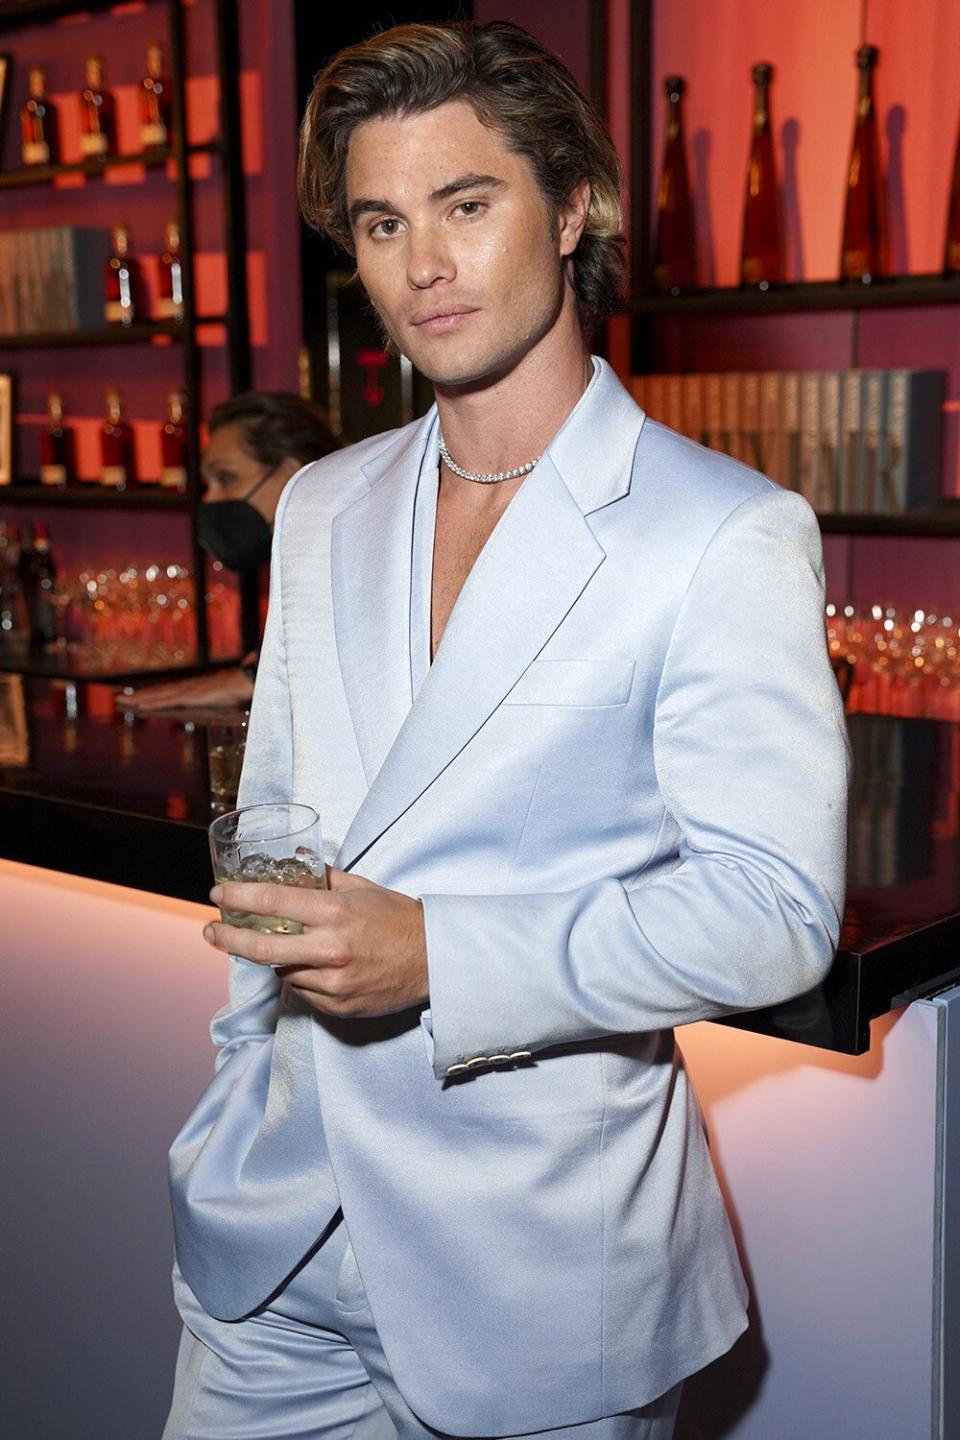 BEVERLY HILLS, CALIFORNIA - MARCH 27: Chase Stokes as Tequila Don Julio Celebrates The Vanity Fair Oscar Party at Wallis Annenberg Center for the Performing Arts on March 27, 2022 in Beverly Hills, California. (Photo by Presley Ann/Getty Images for Vanity Fair)